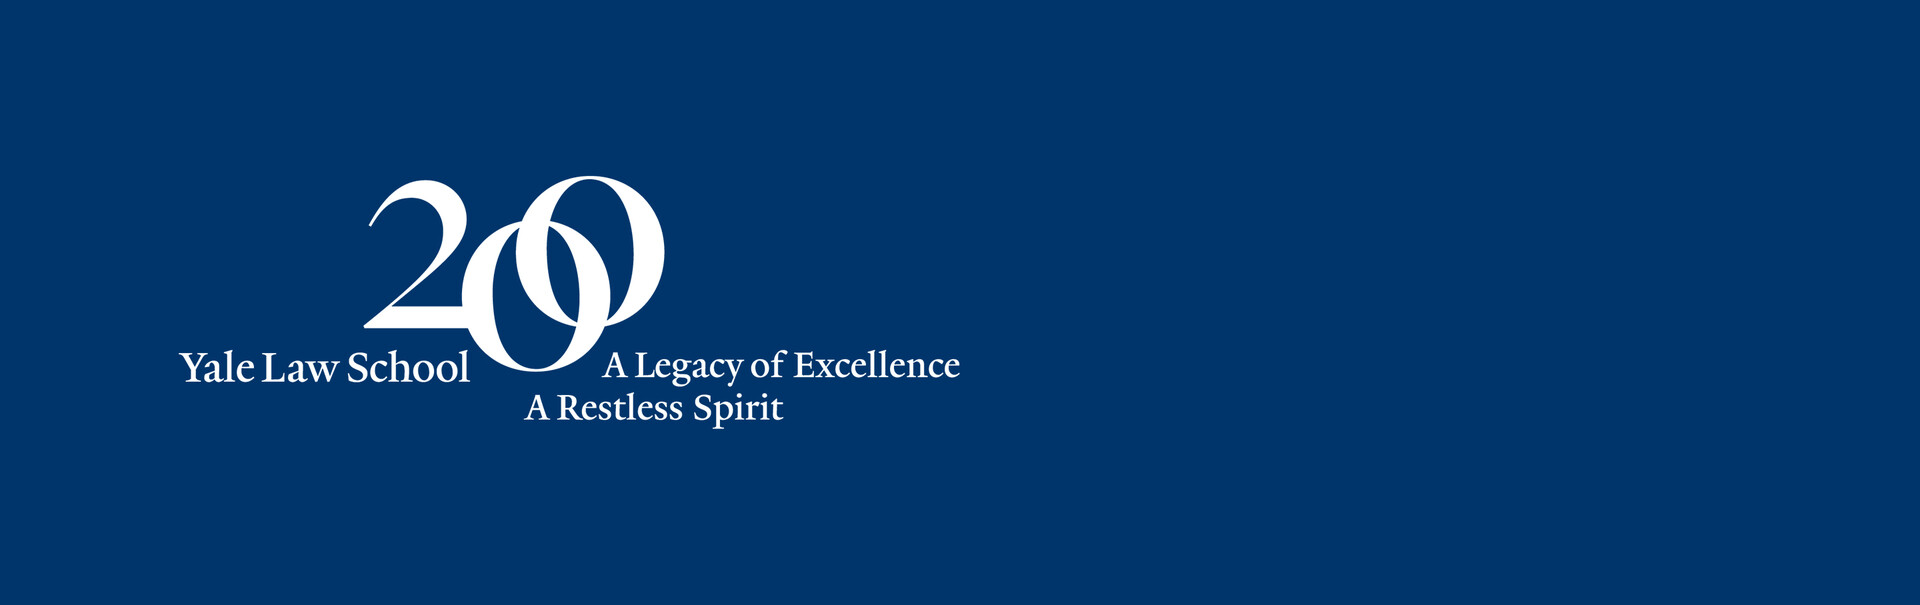 Yale blue background with Yale Law School 200: A Legacy of Excellence, A Restless Spirit logo